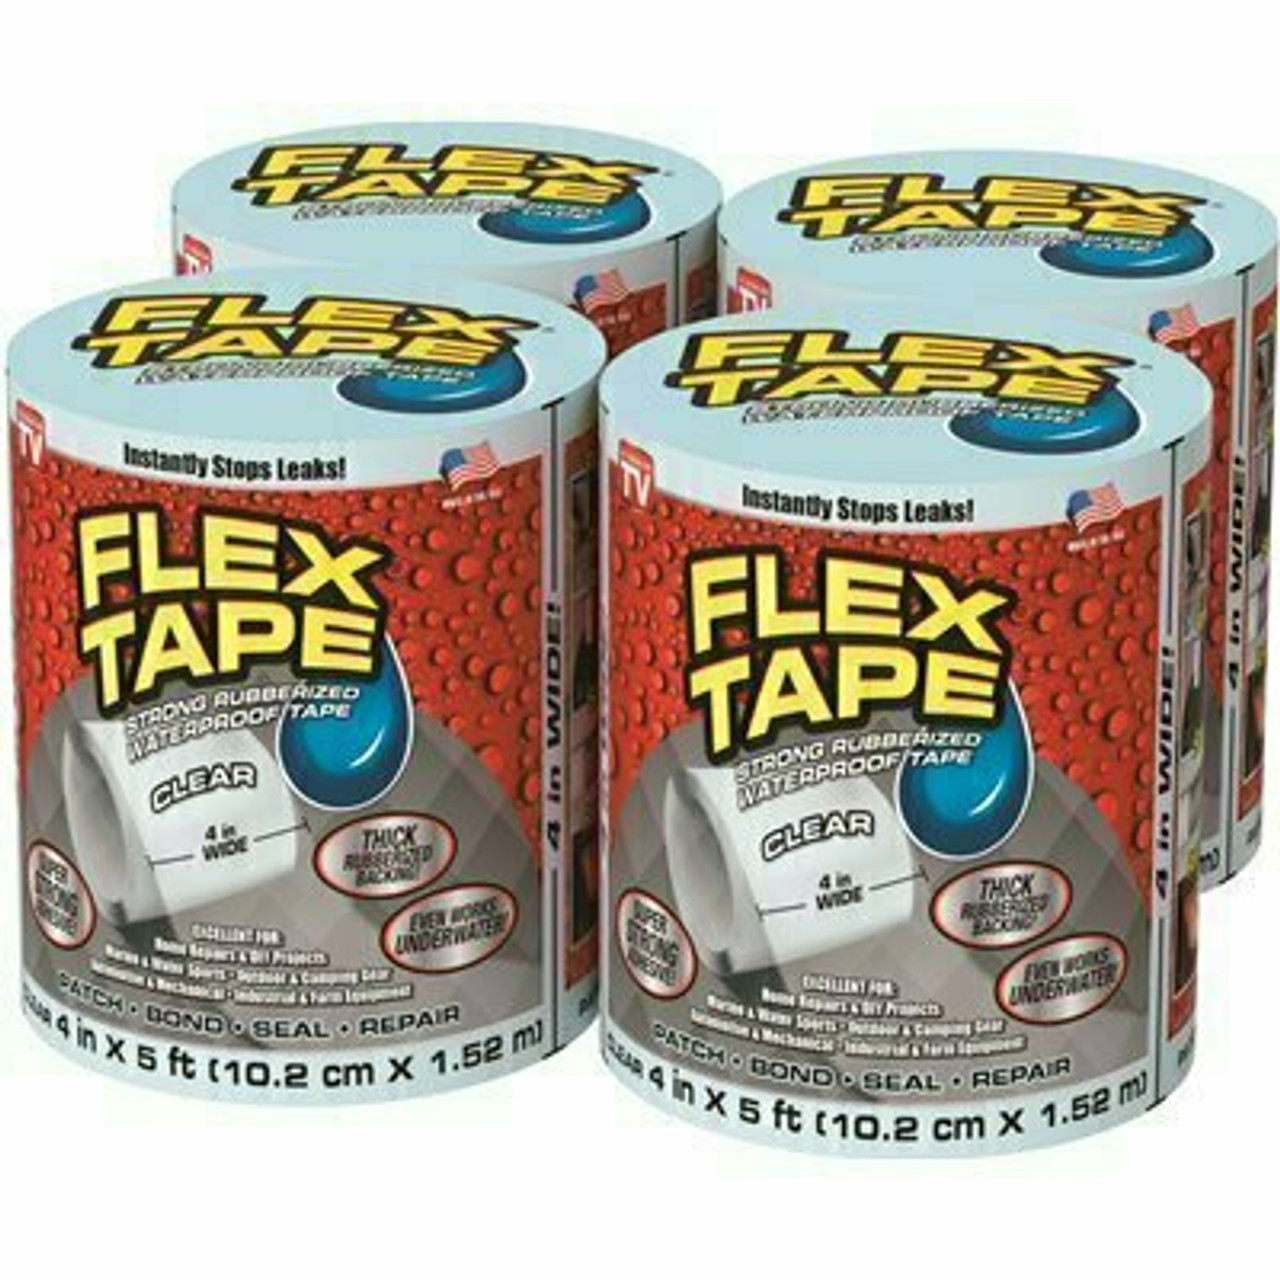 Flex Seal Family Of Products Flex Tape Clear 4 In. X 5 Ft. Strong Rubberized Waterproof Tape (4-Piece)